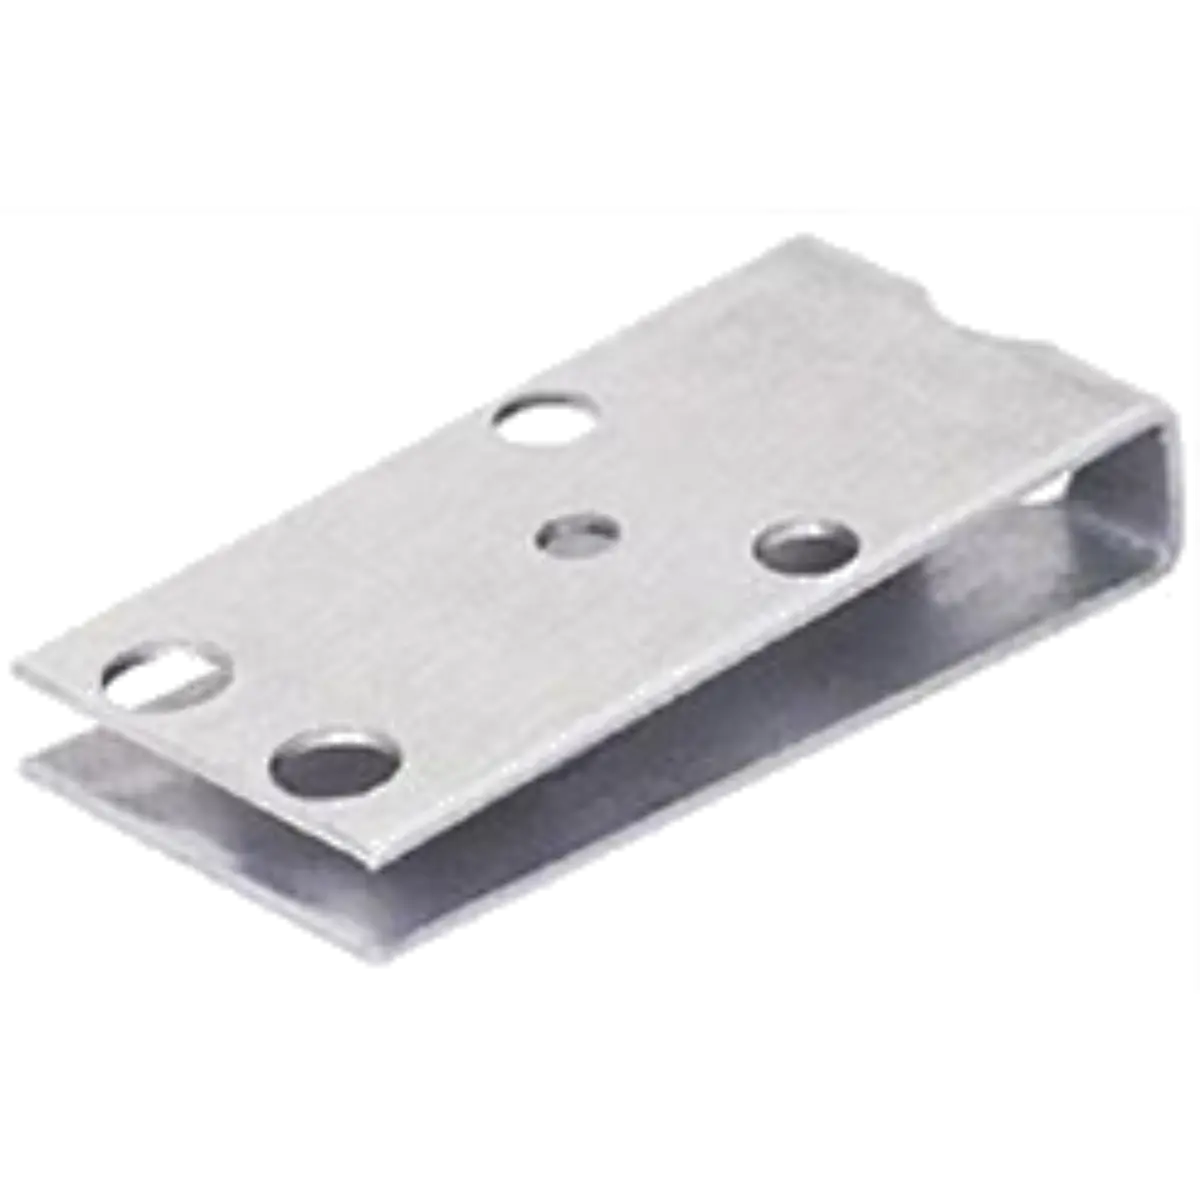 Steel Wear Plate For Eastman Cutting Machines - 32mm x 15mm  79C12-218